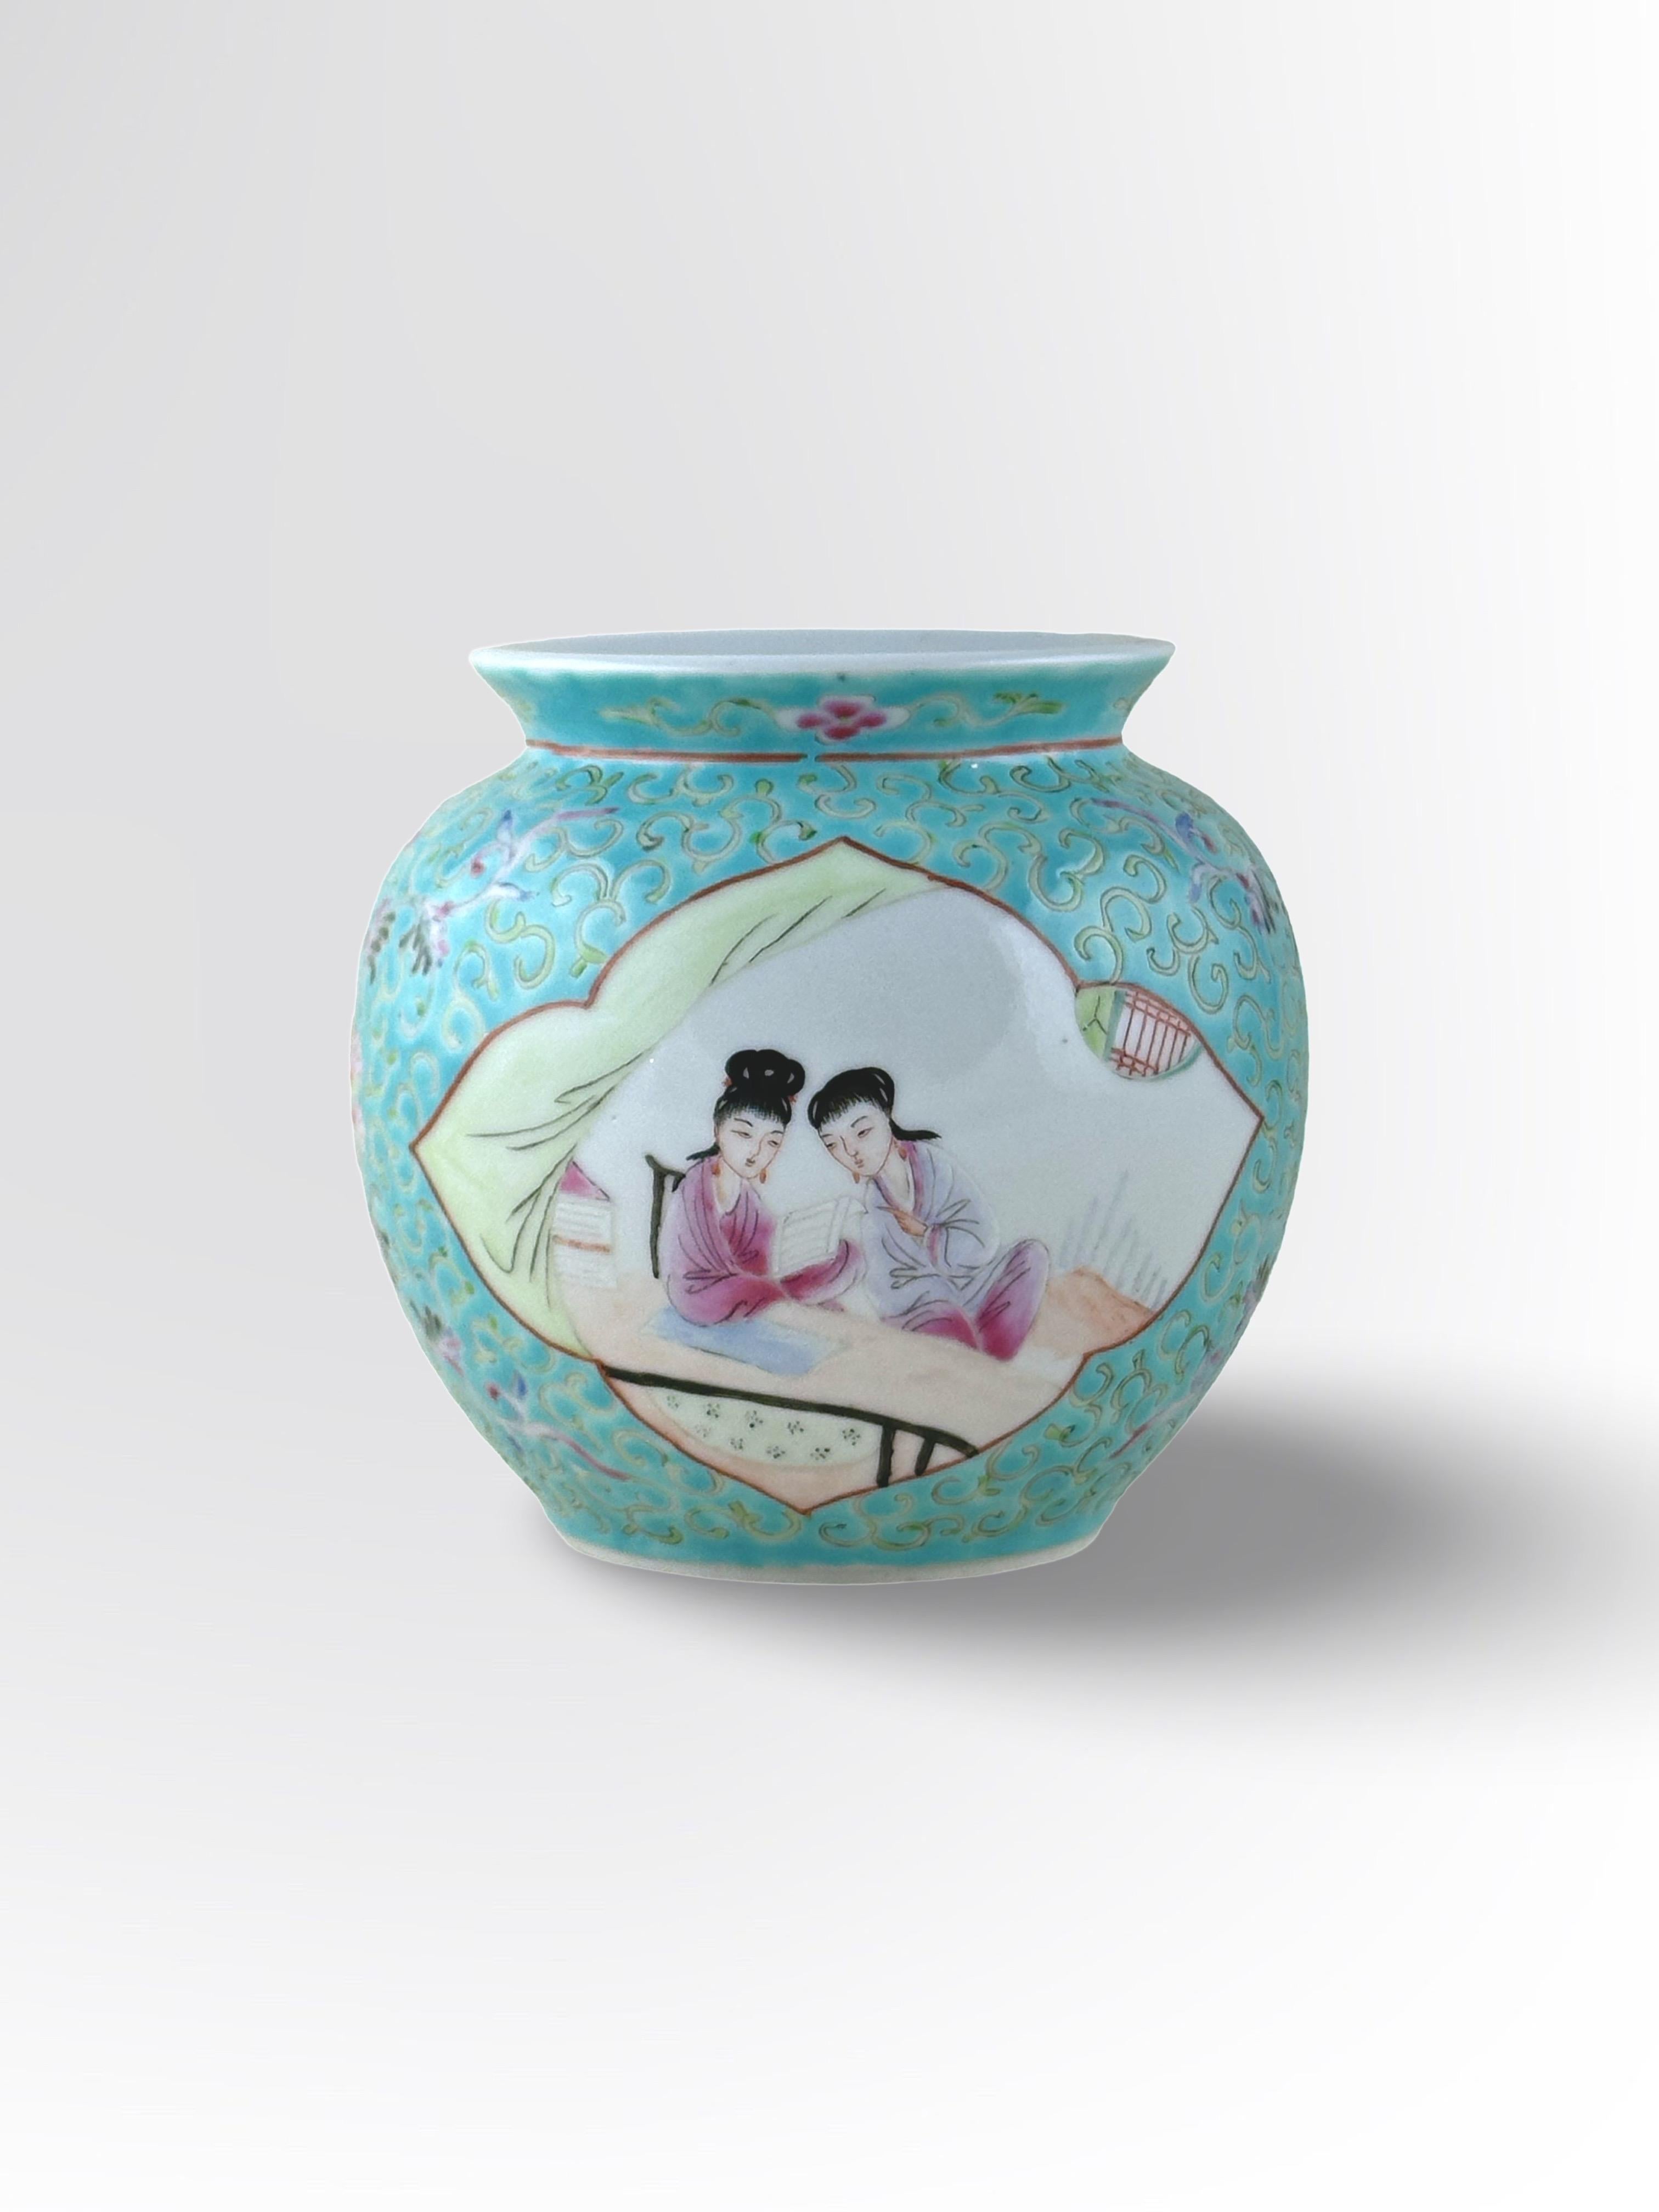 A vintage Chinese porcelain jar, signed on its underside with 'Jiangxi Chu Pin'. 

The jar is adorned with a colourful 'Famille Rose' style decoration of two figural scenes, each depicting a mother/female and child. The first scene shows a mother